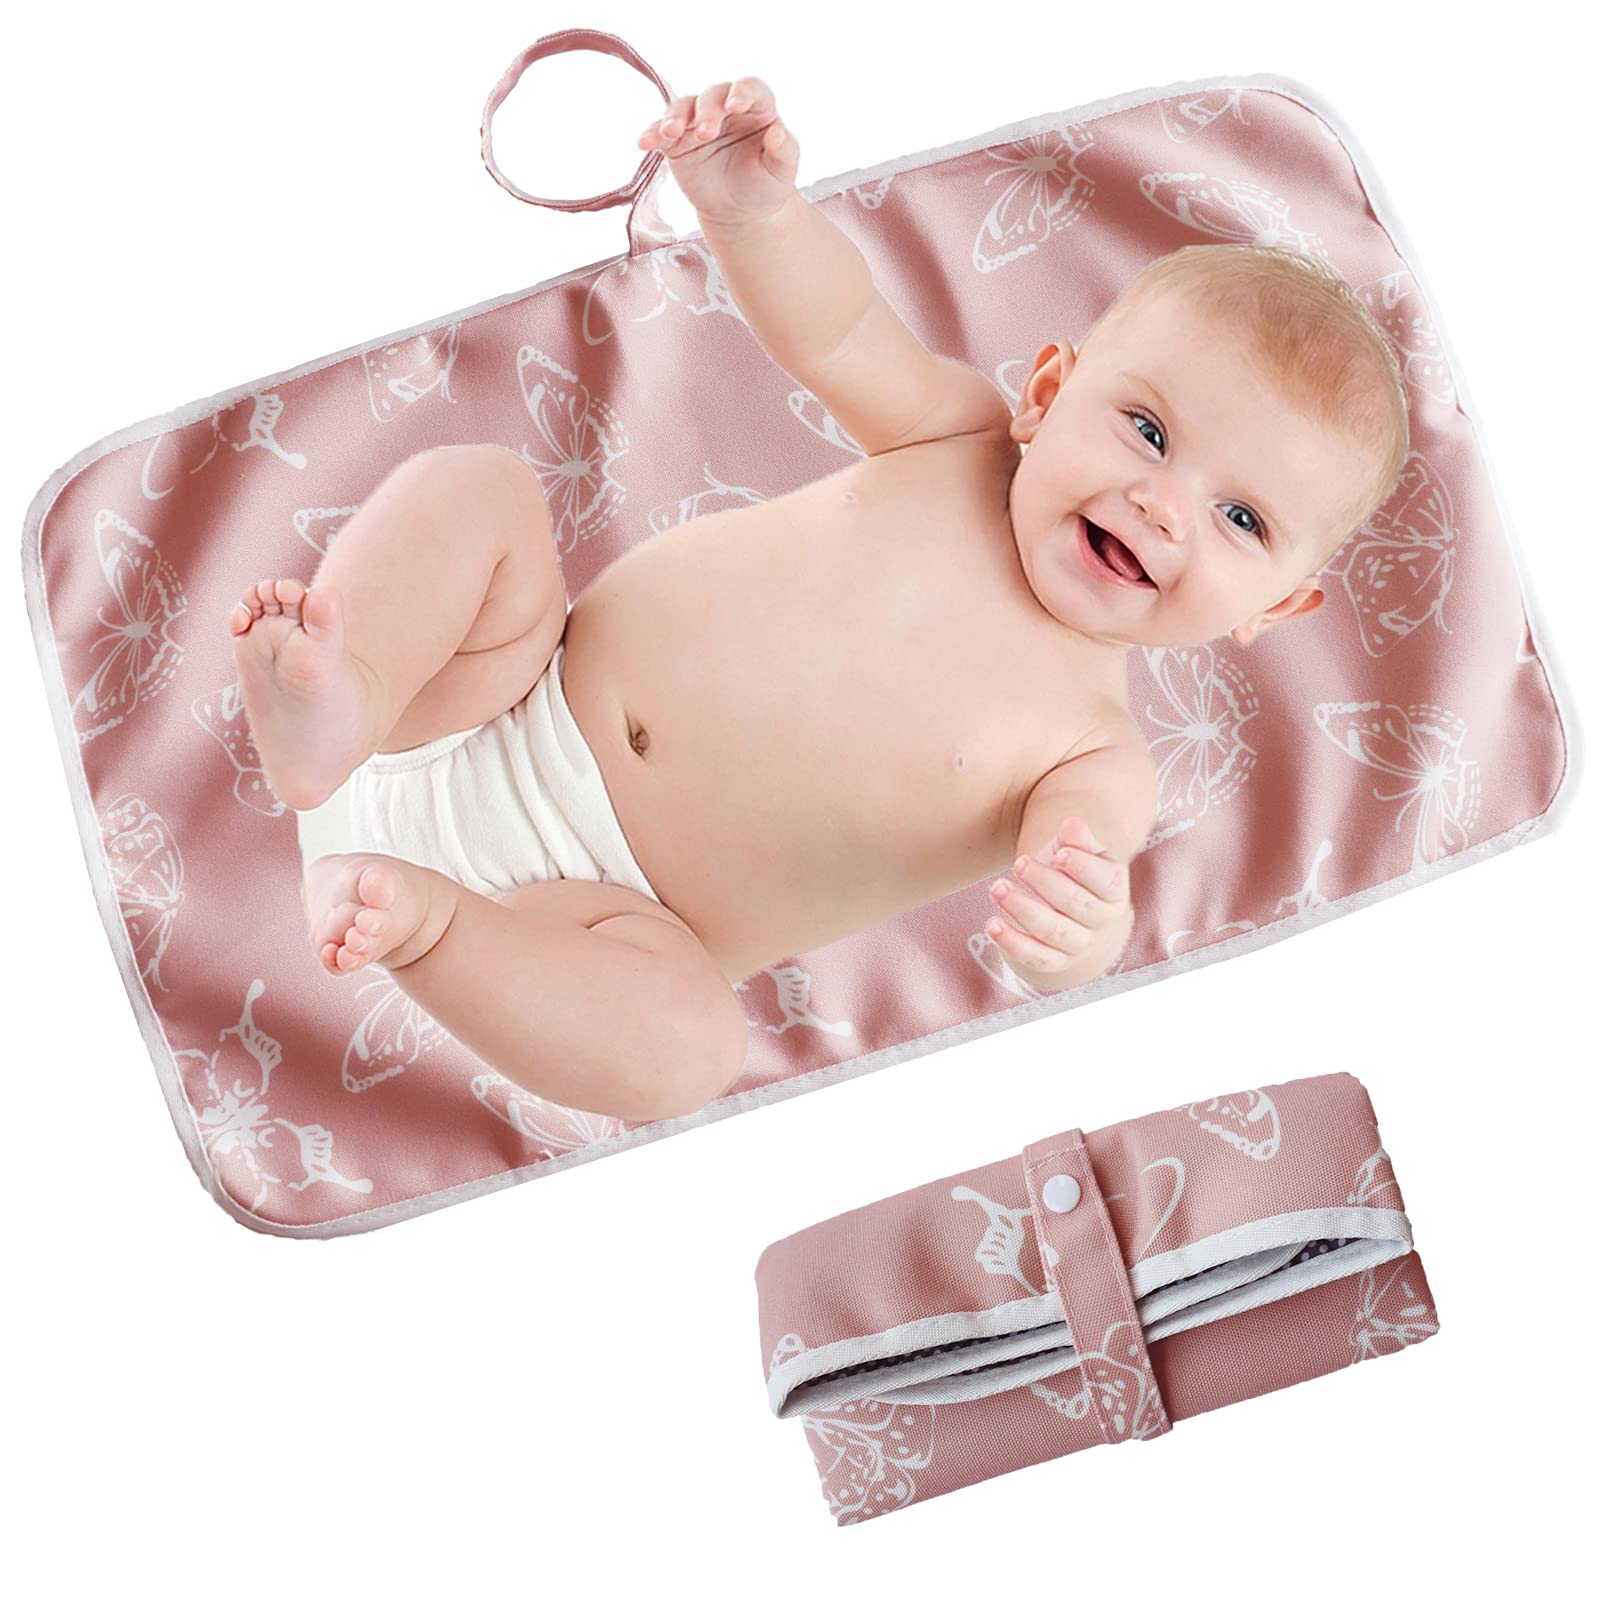 Portable Changing Mat Baby Foldable Travel Changing Mat Infant Urinal Pad 60cm x 35cm Waterproof Nappy Change Mat for Travel Home Outside - KAMHBE (Pink)